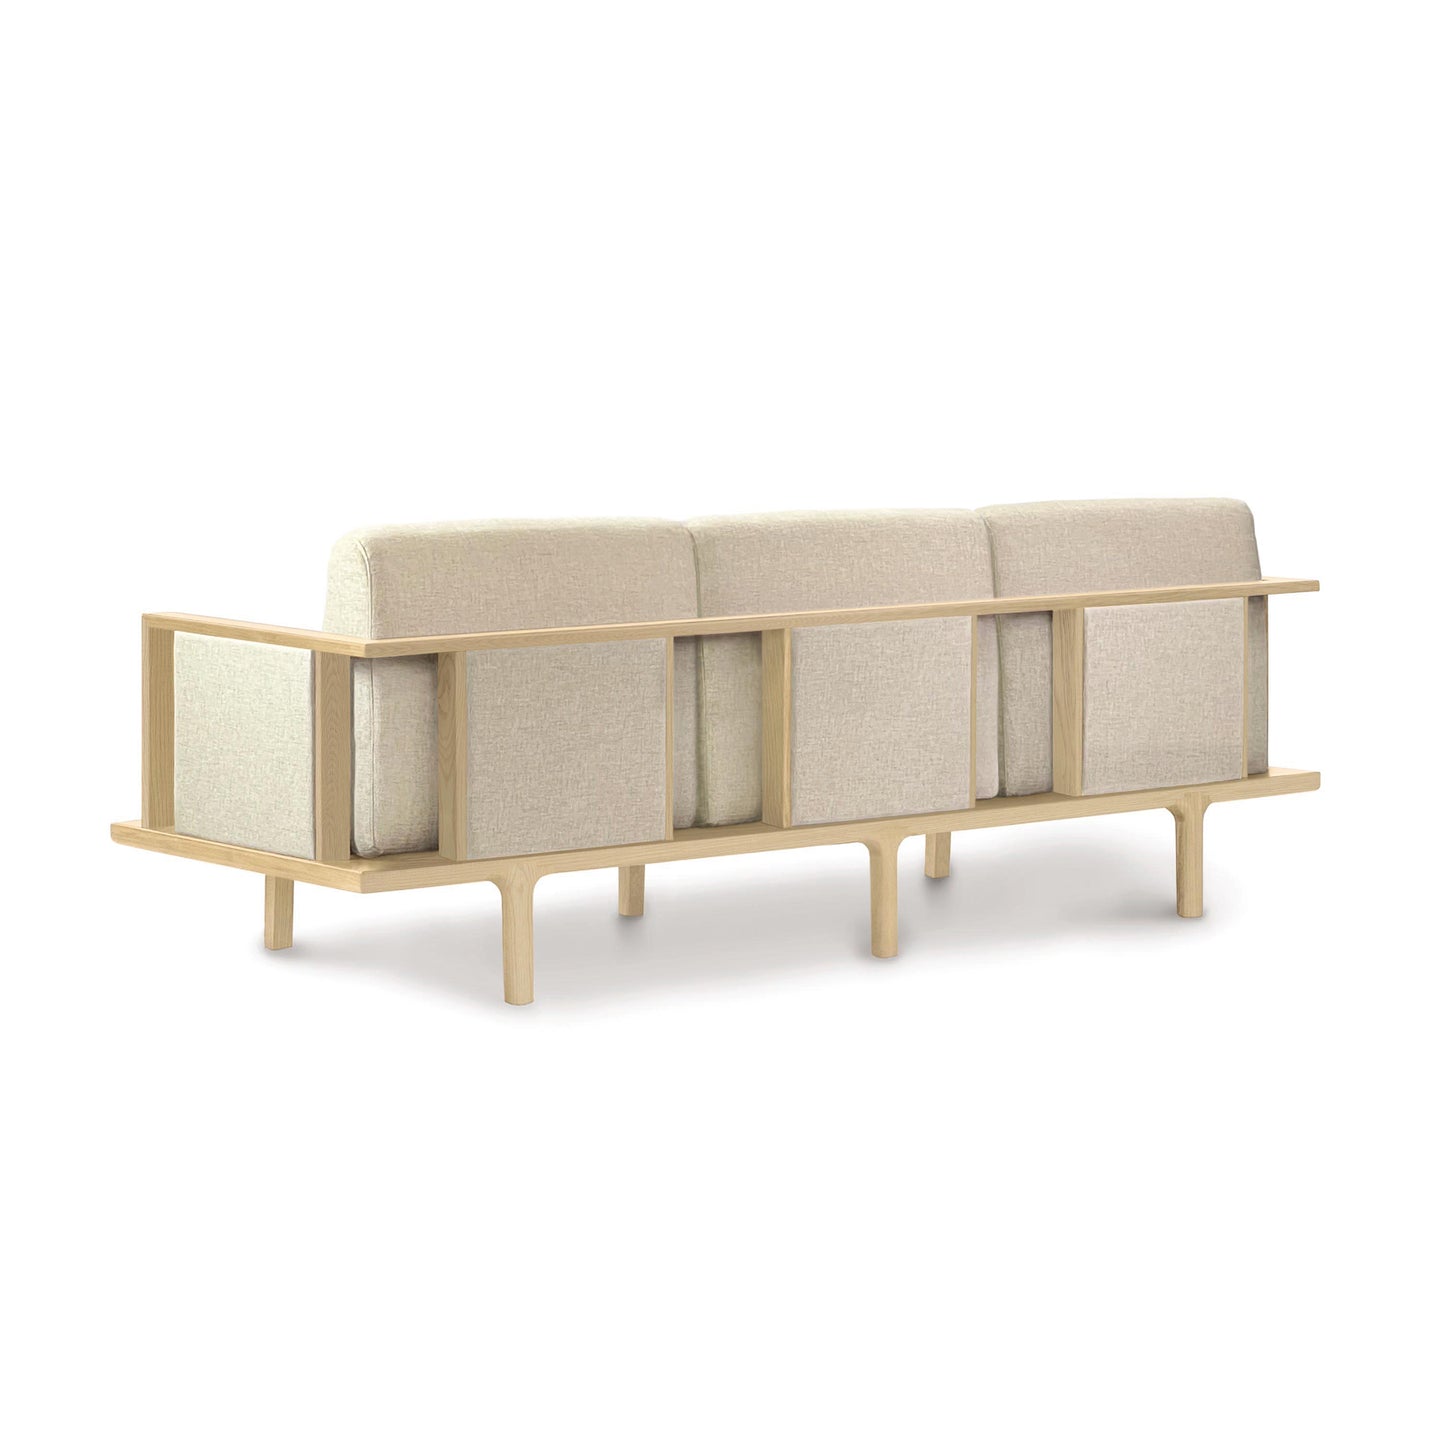 Contemporary design Sierra Oak Upholstered Sofa with Upholstered Panels from Copeland Furniture, with beige cushions, isolated on a white background.